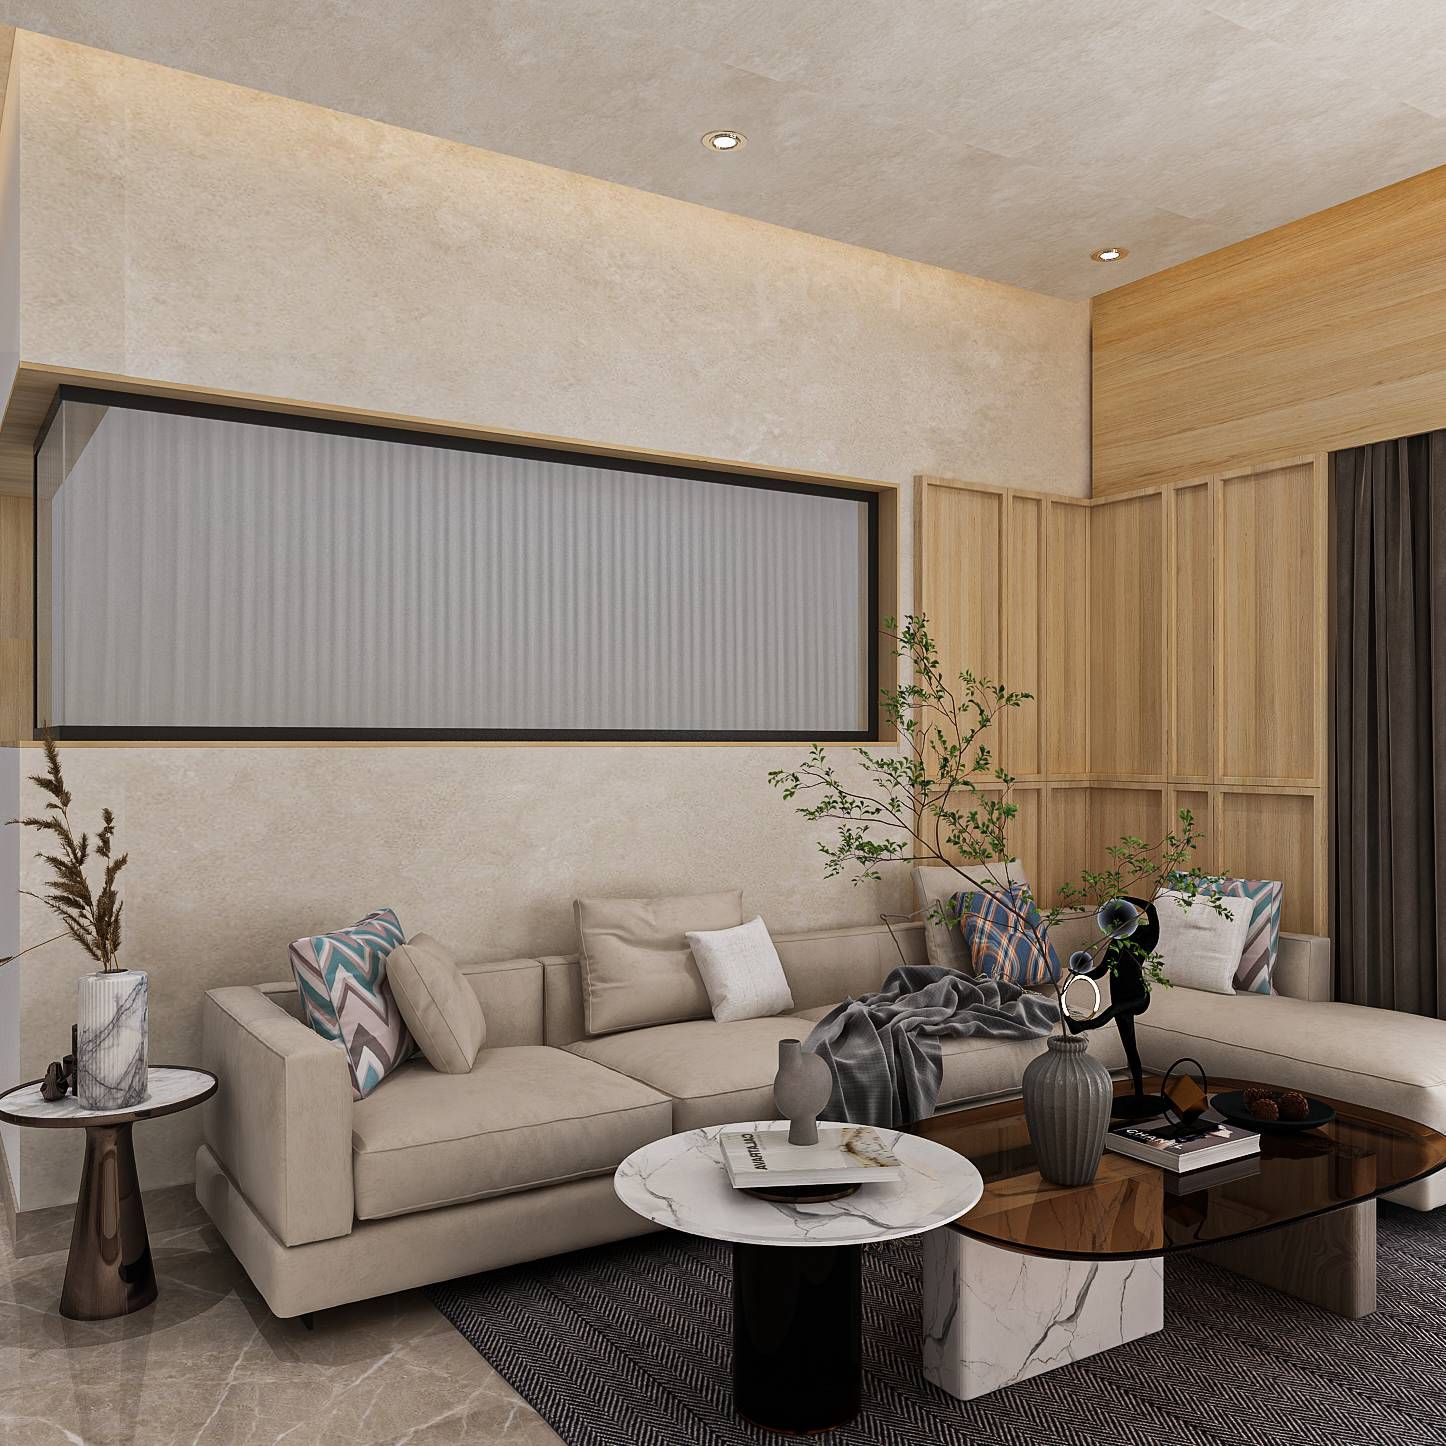 Modern Living Room Design With A Beige 4-Seater Sofa